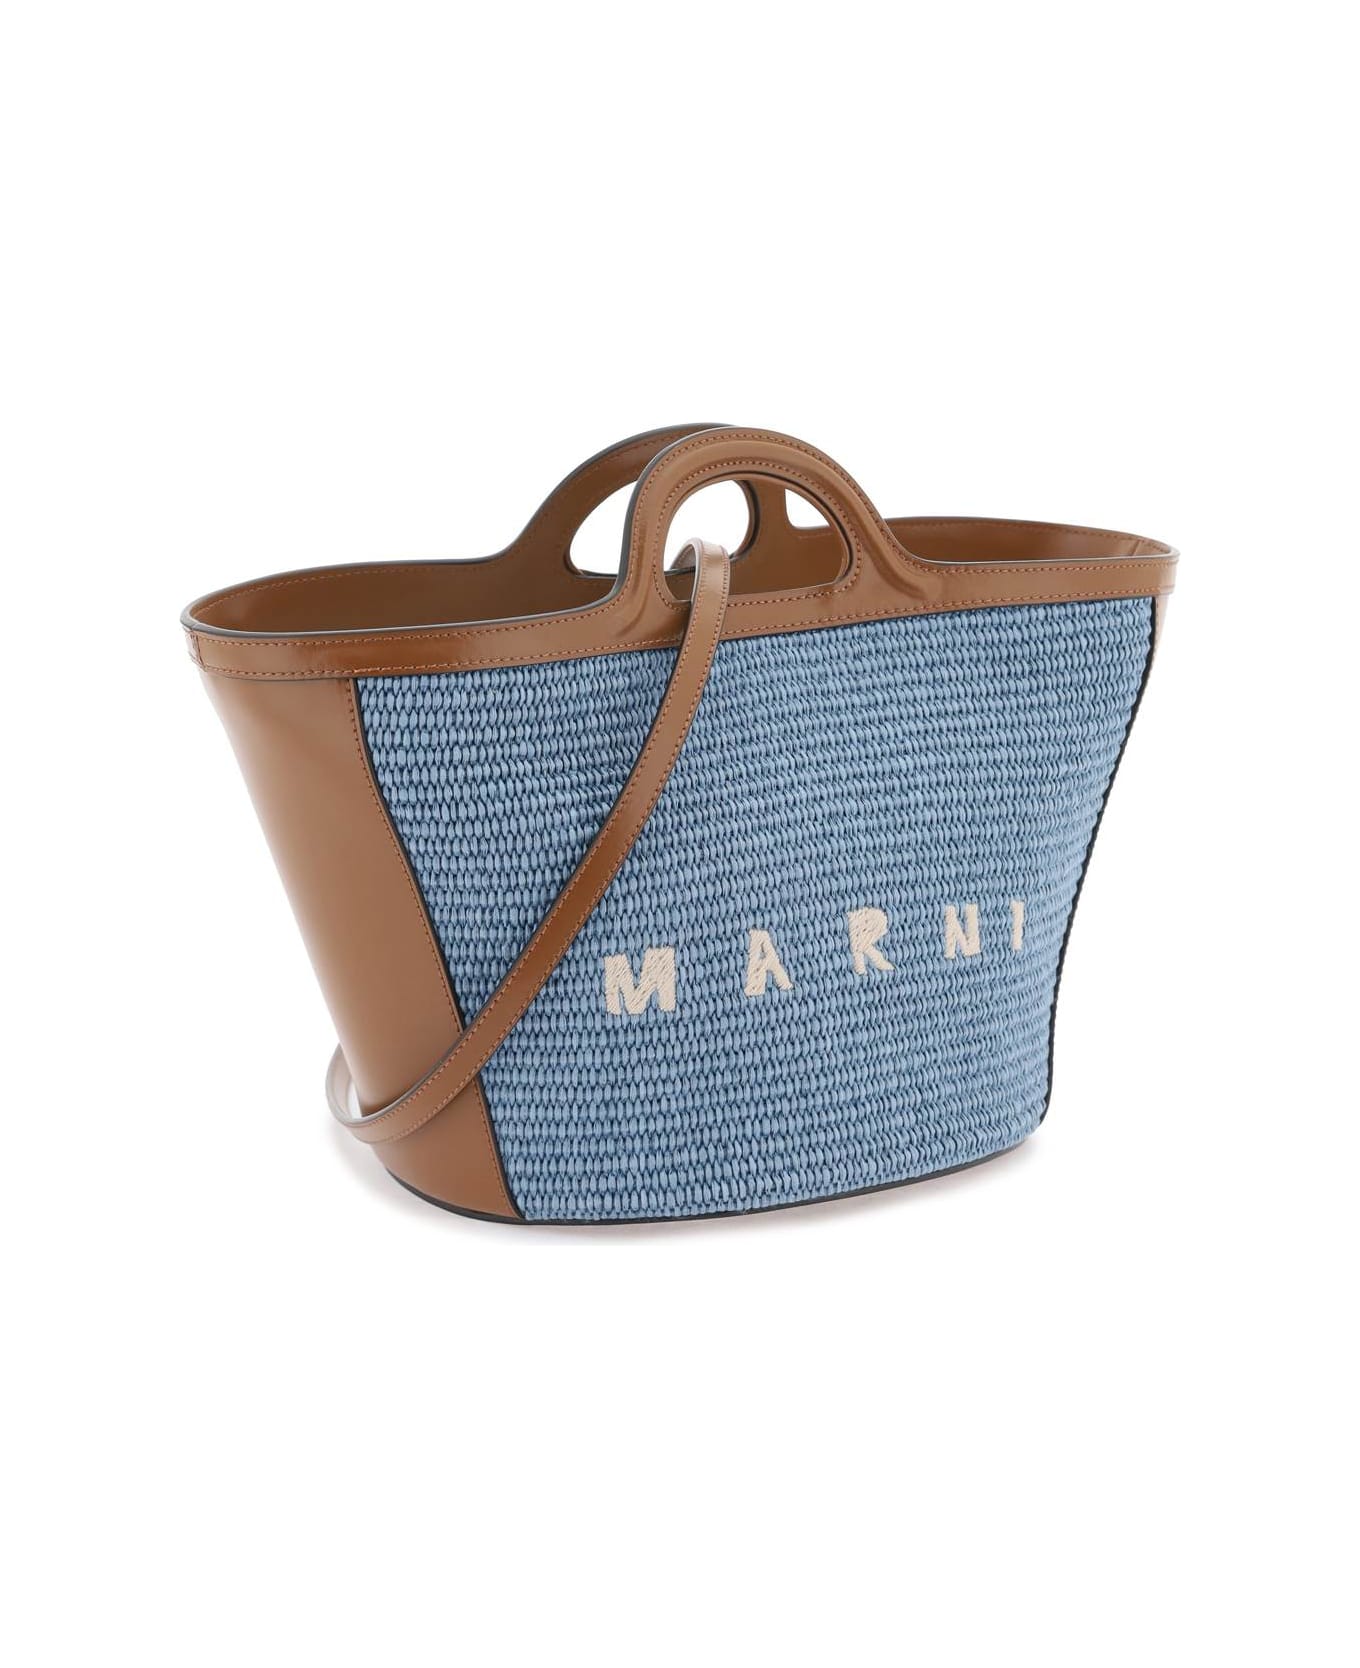 Marni Small Tropicalia Summer Bag In Brown Leather And Light Blue Raffia - ZO751 トートバッグ